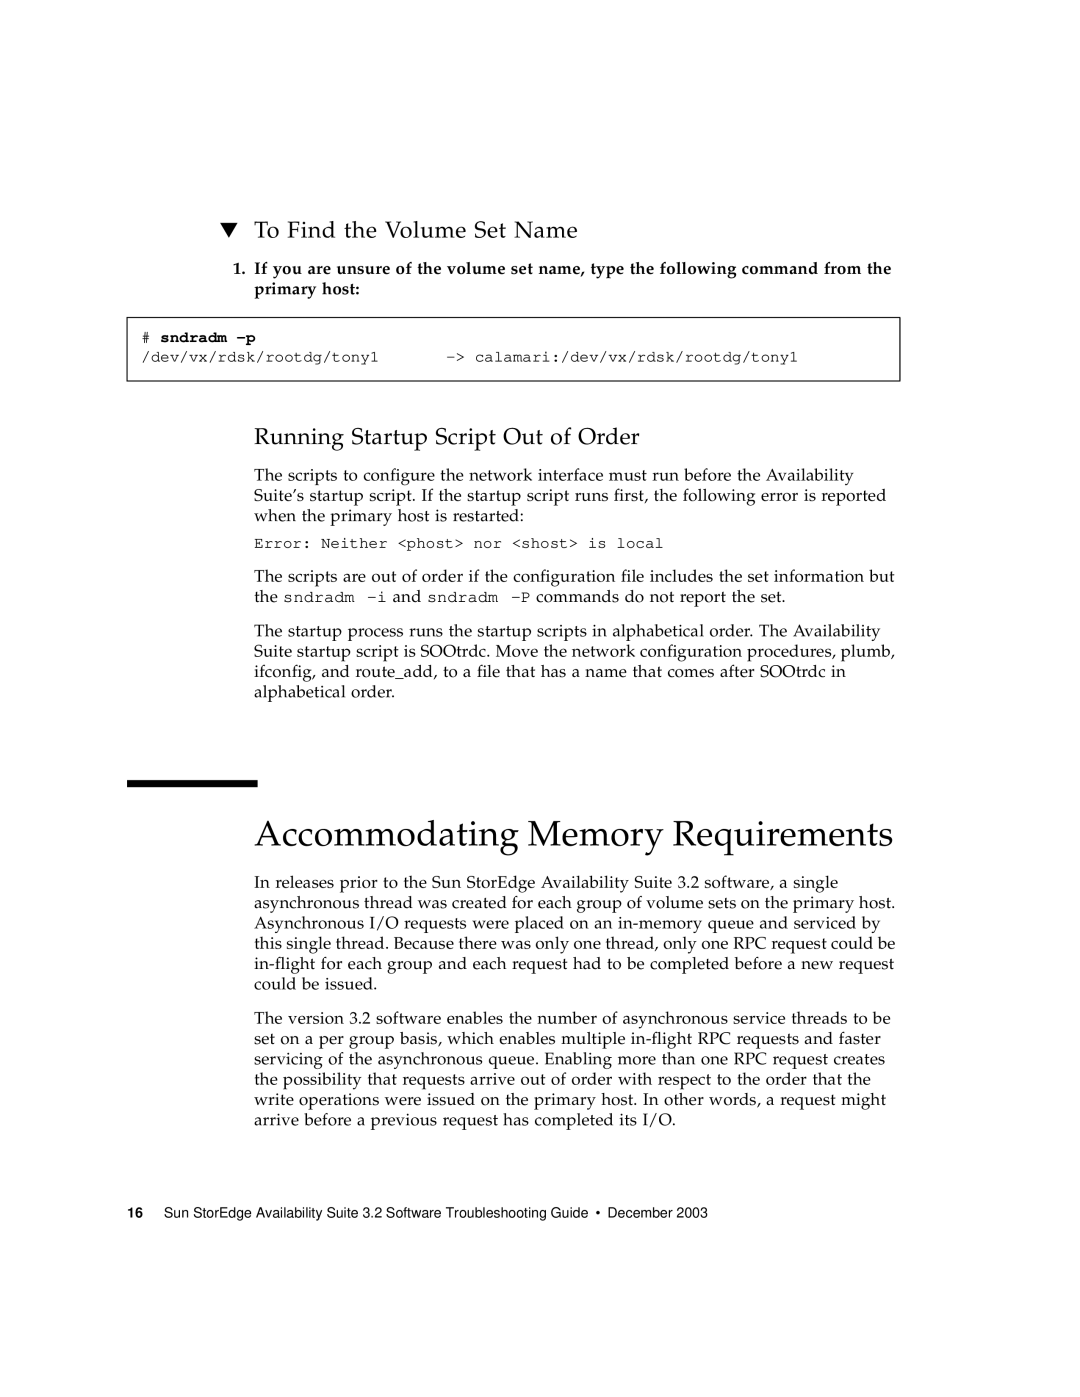 Sun Microsystems 3.2 Accommodating Memory Requirements, To Find the Volume Set Name, Running Startup Script Out of Order 